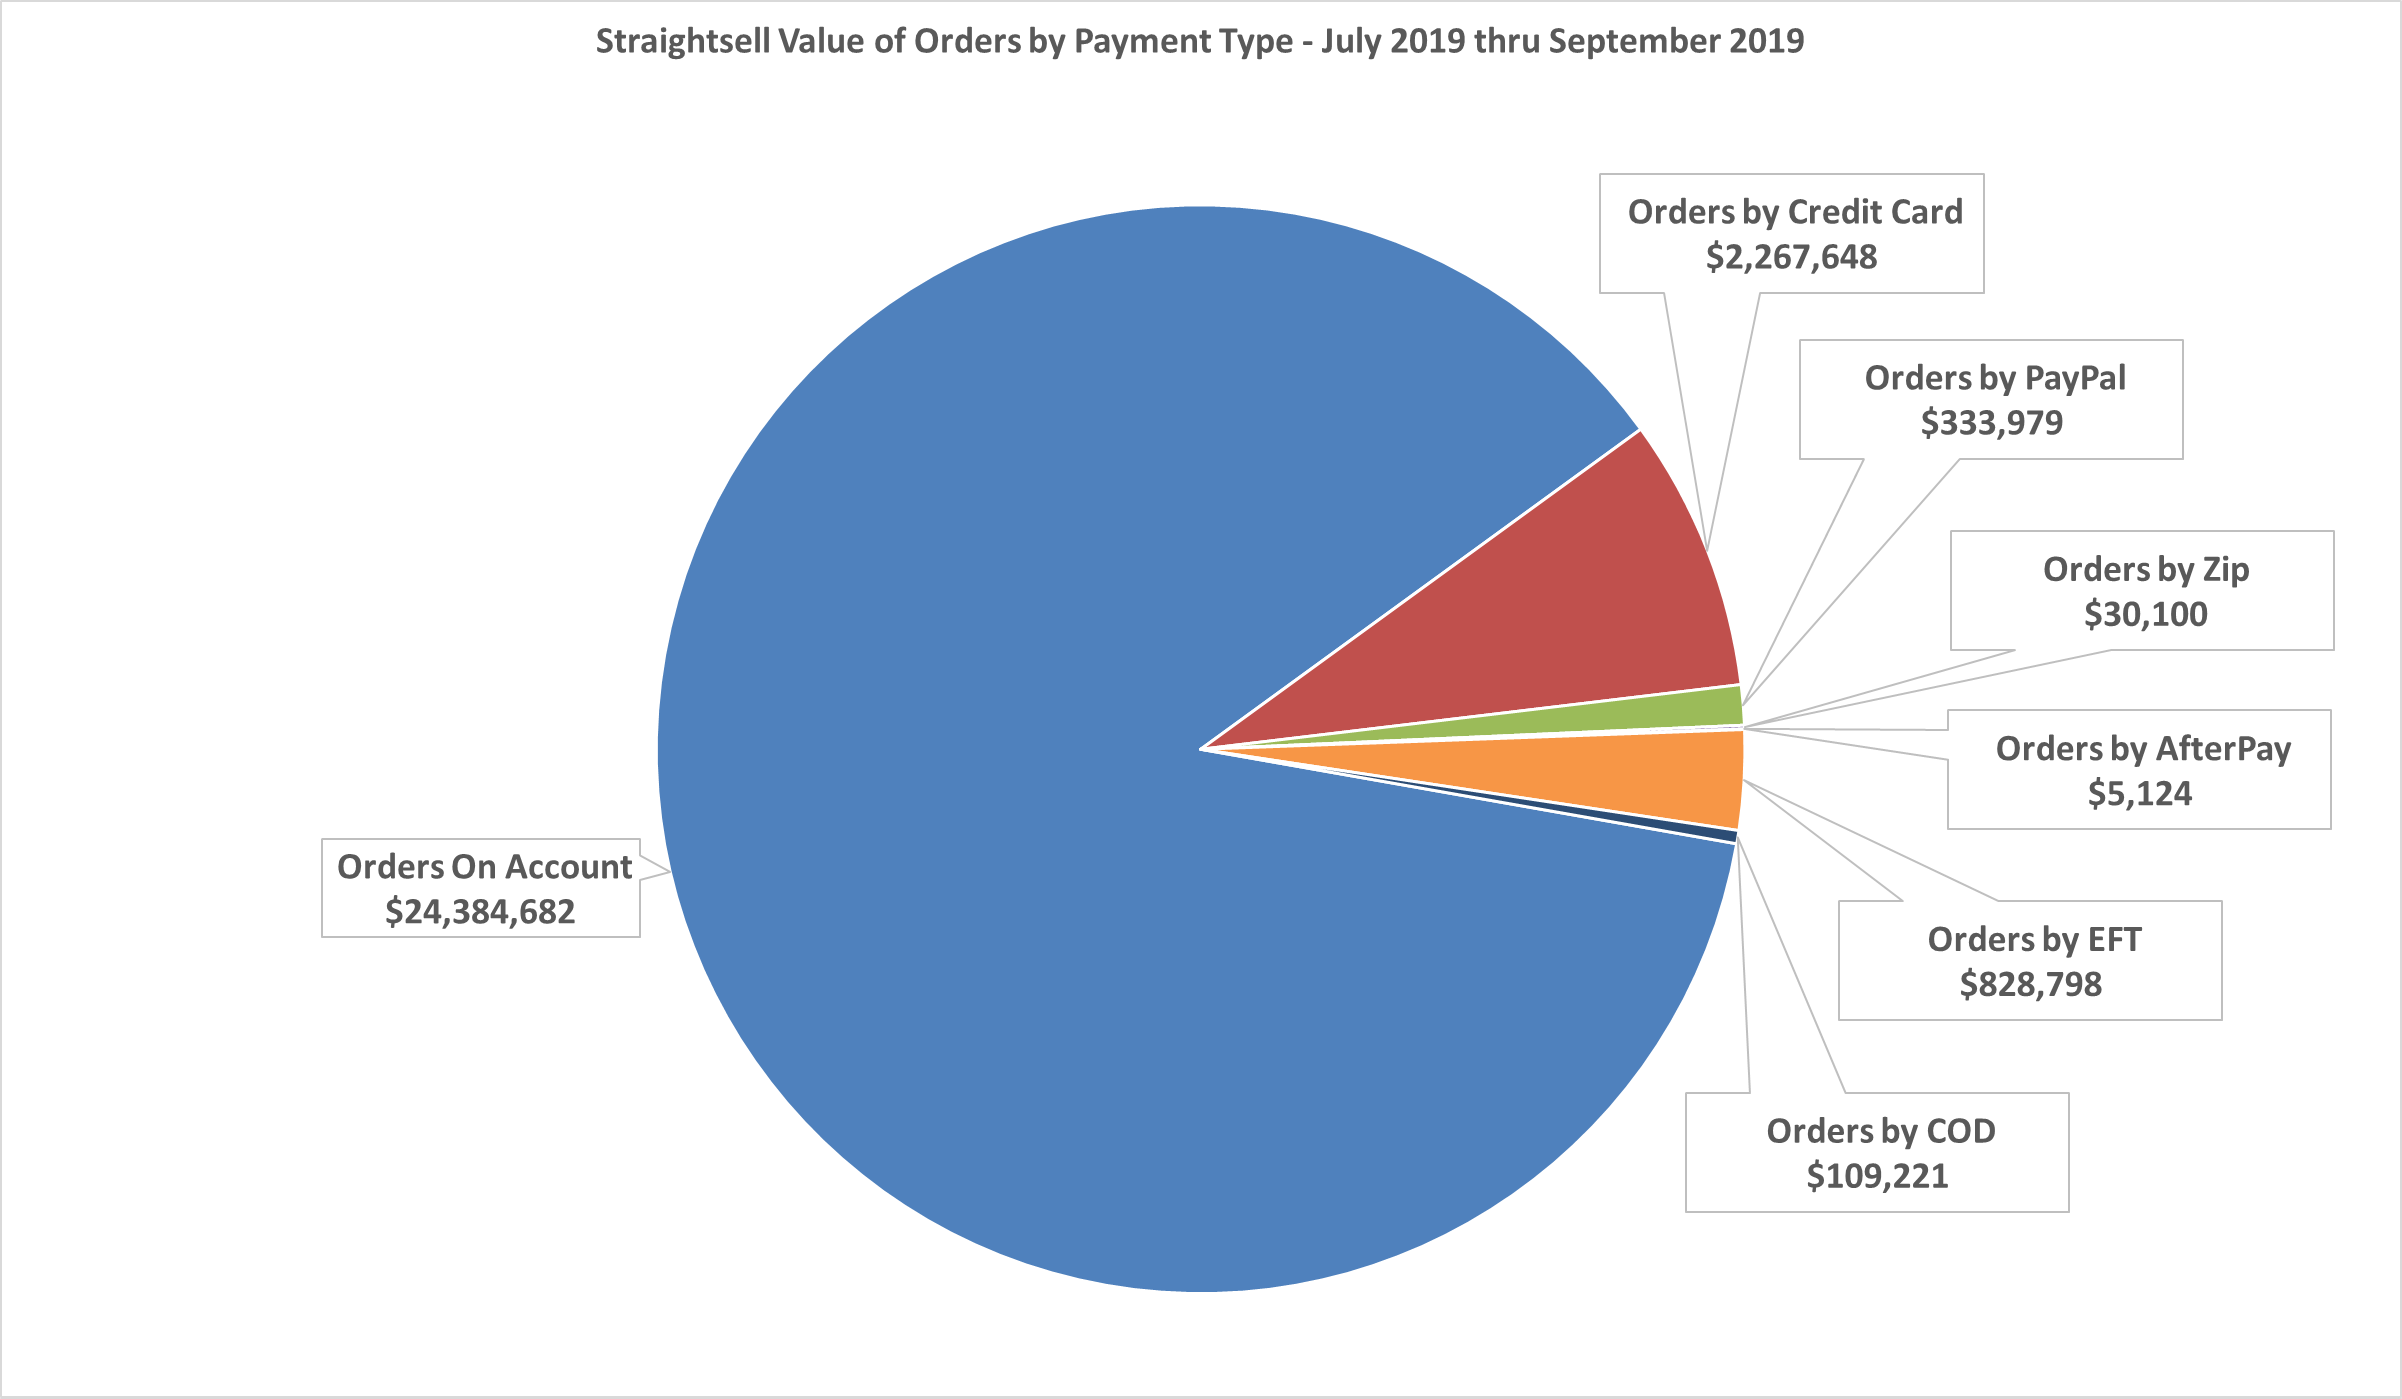 Straightsell Value of Orders by Payment Type - July 2019 thru September 2019